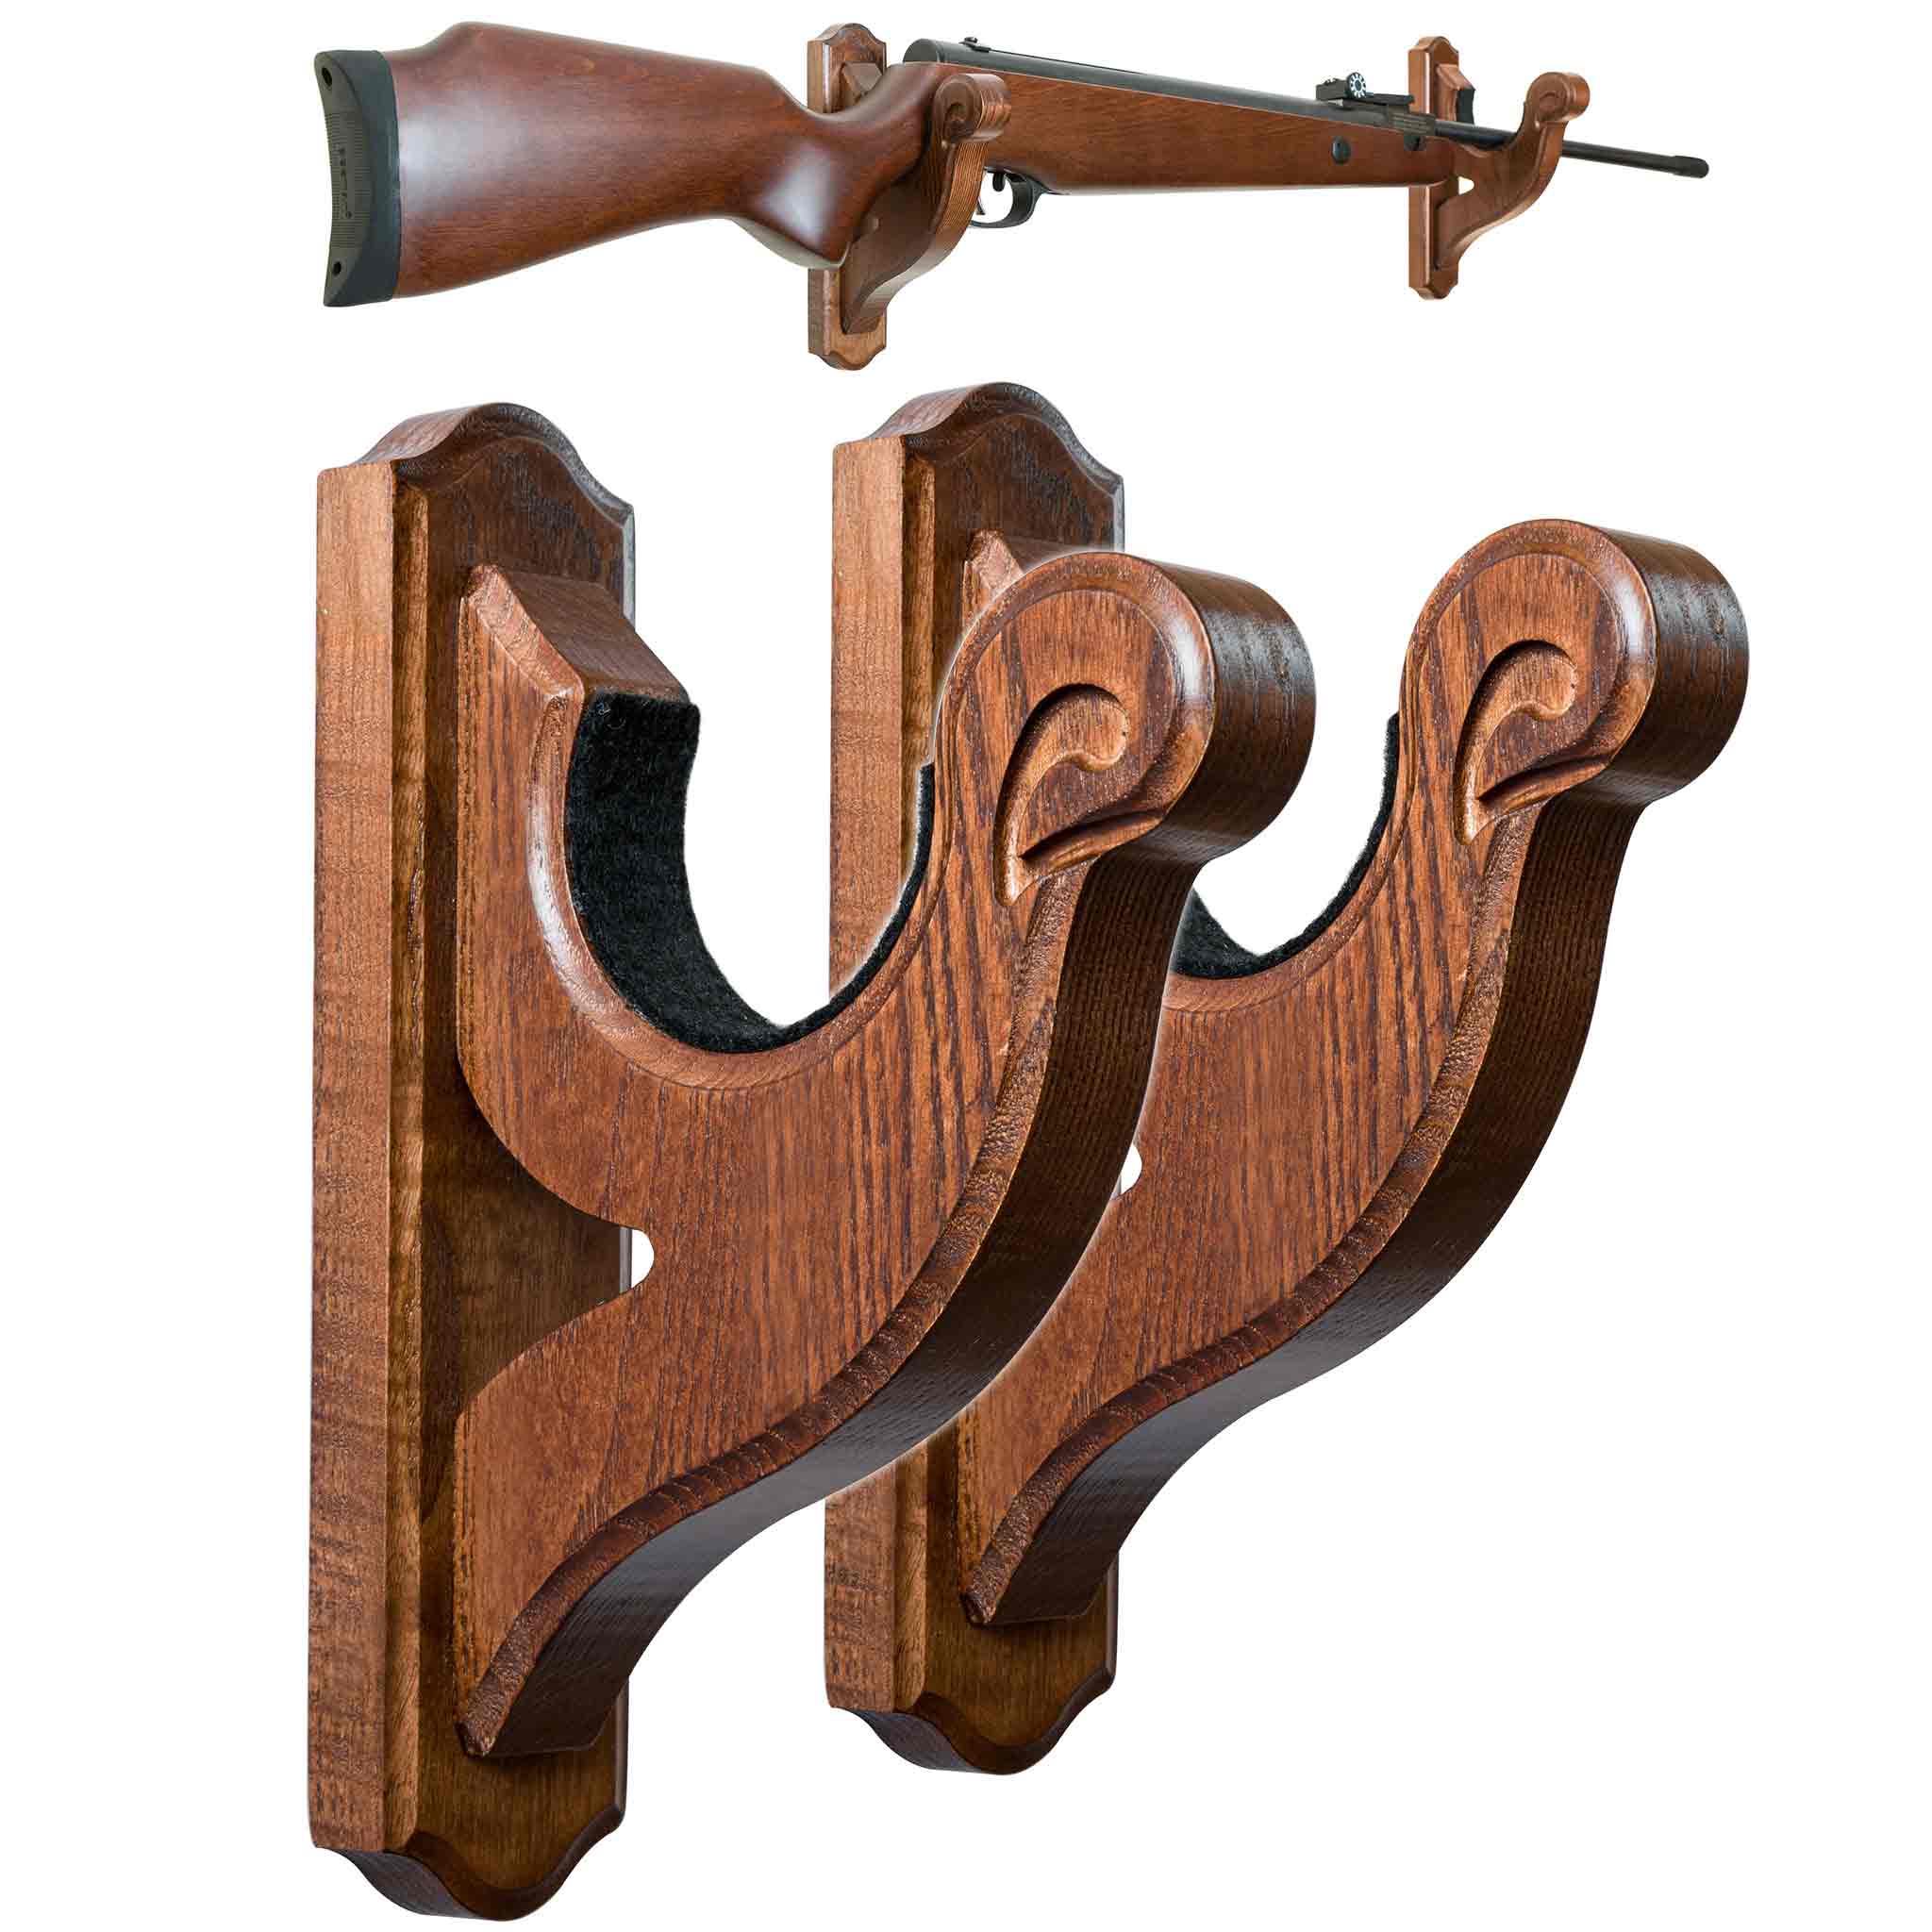 Store your guns safely with our forked wooden Gun Rack Hangers!